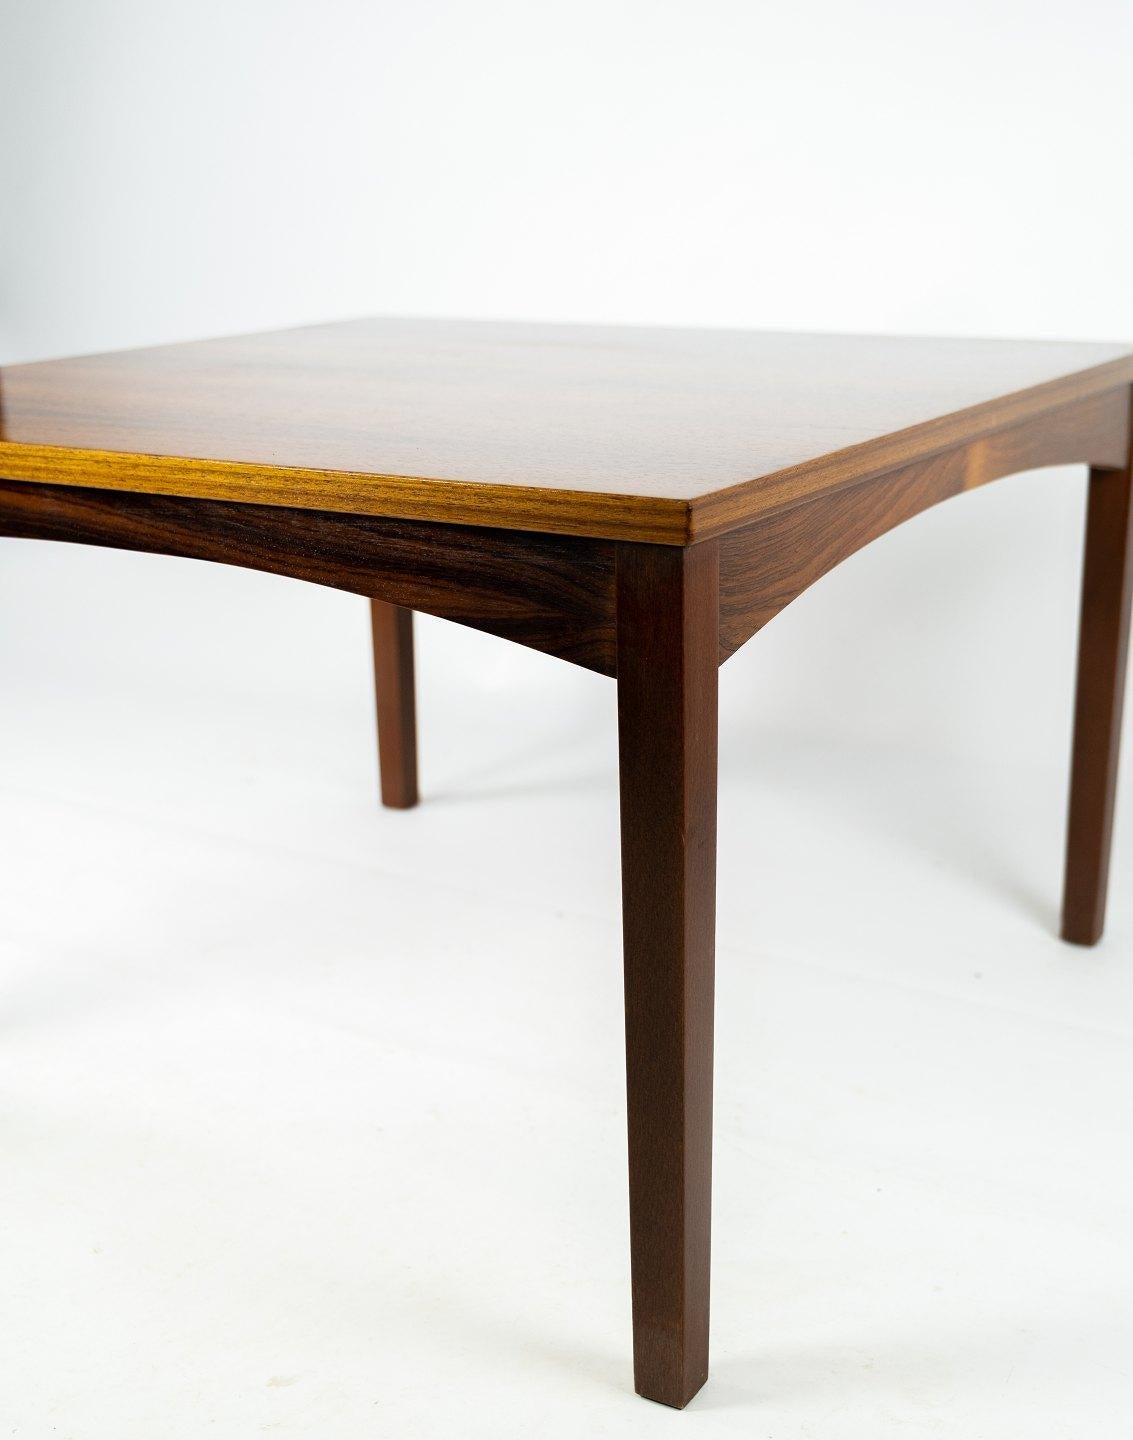 Scandinavian Modern Coffee Table in Rosewood of Danish Design from the 1960s For Sale